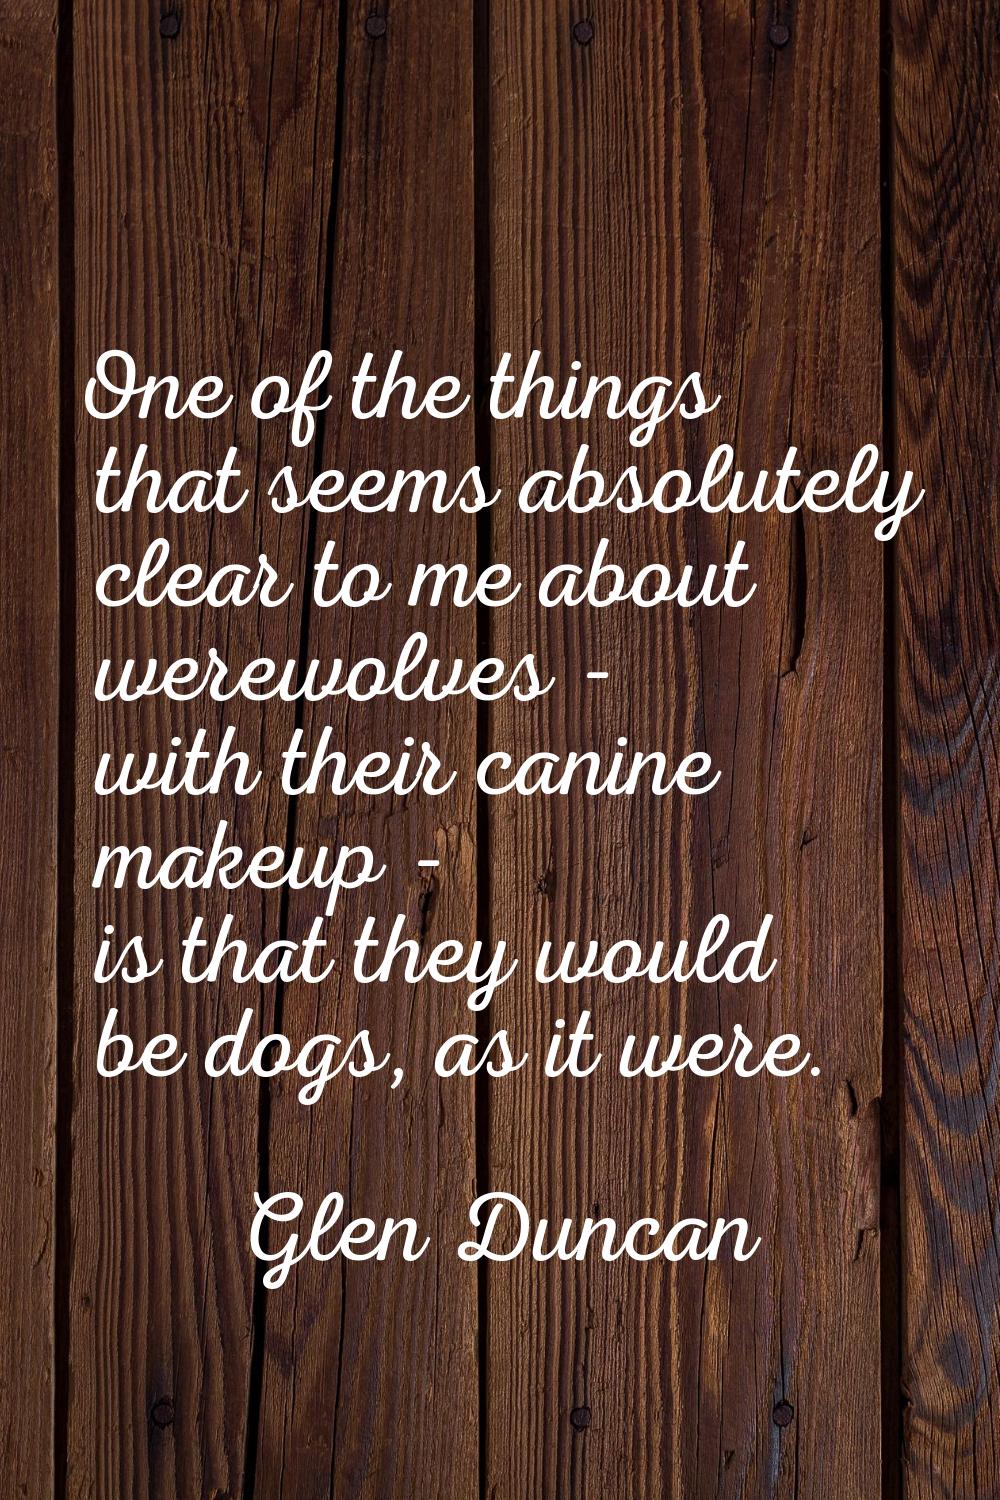 One of the things that seems absolutely clear to me about werewolves - with their canine makeup - i